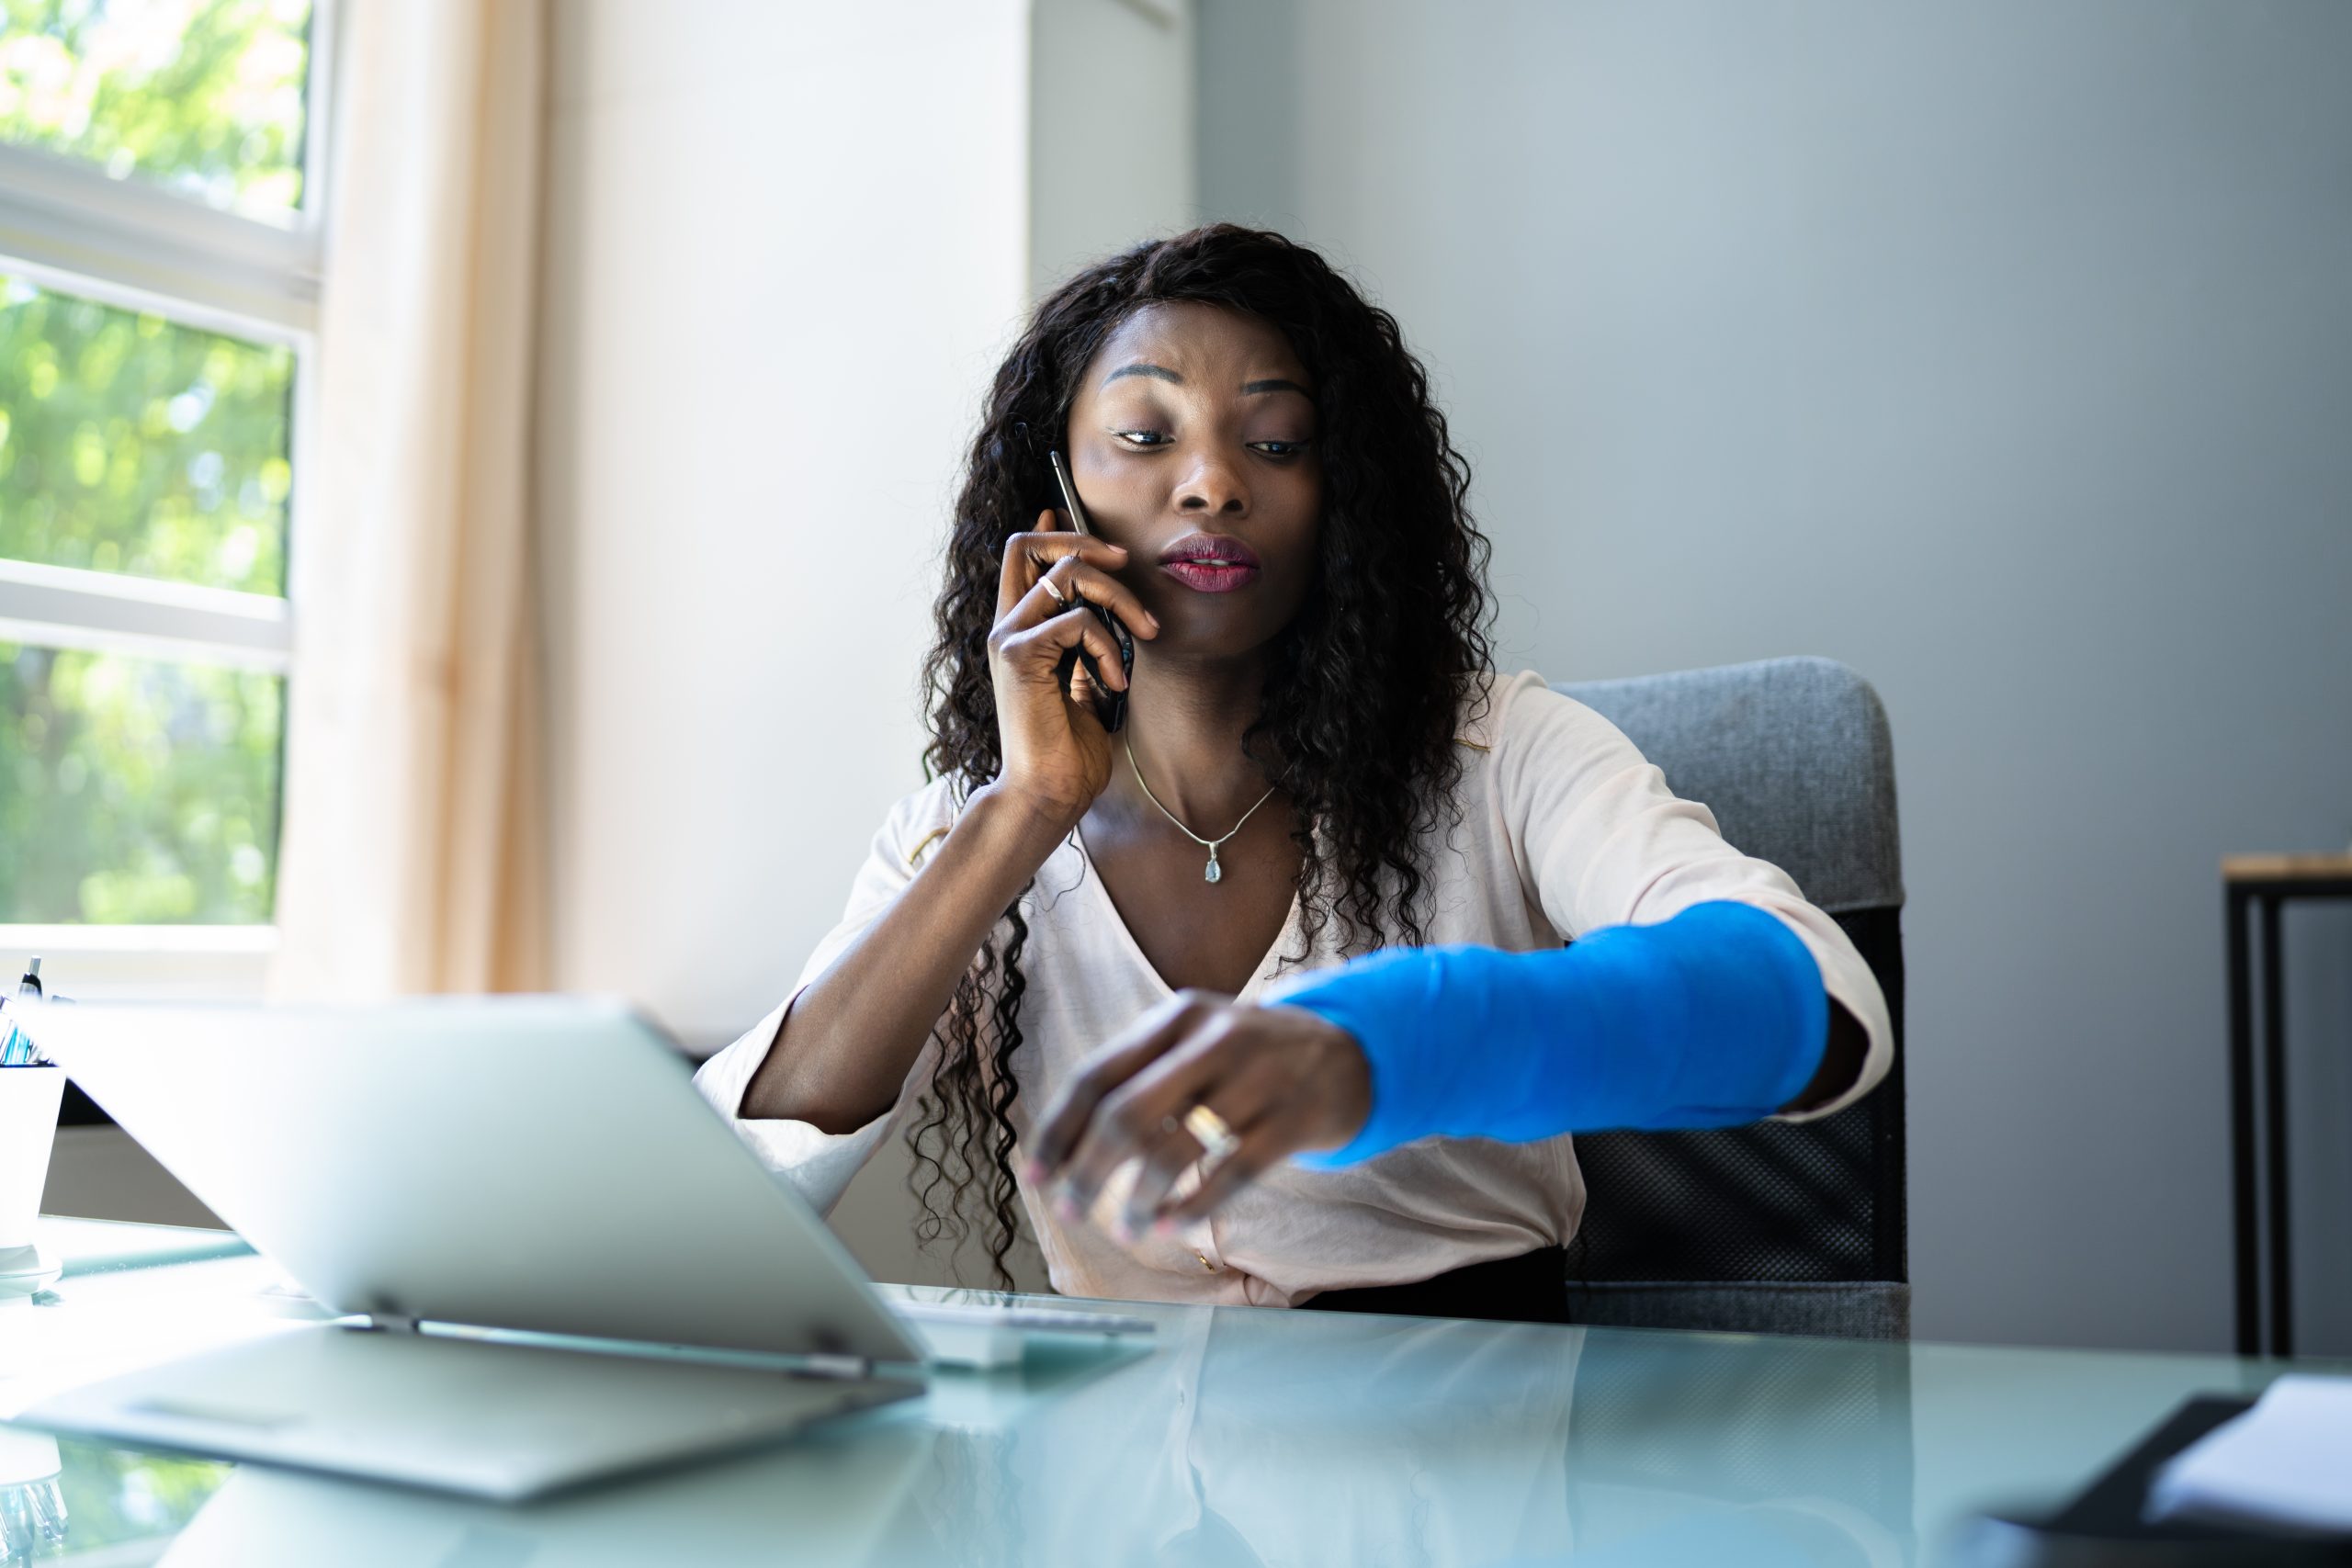 Broken Arm Injured Workers' Compensation Coverage. Using Office Laptop